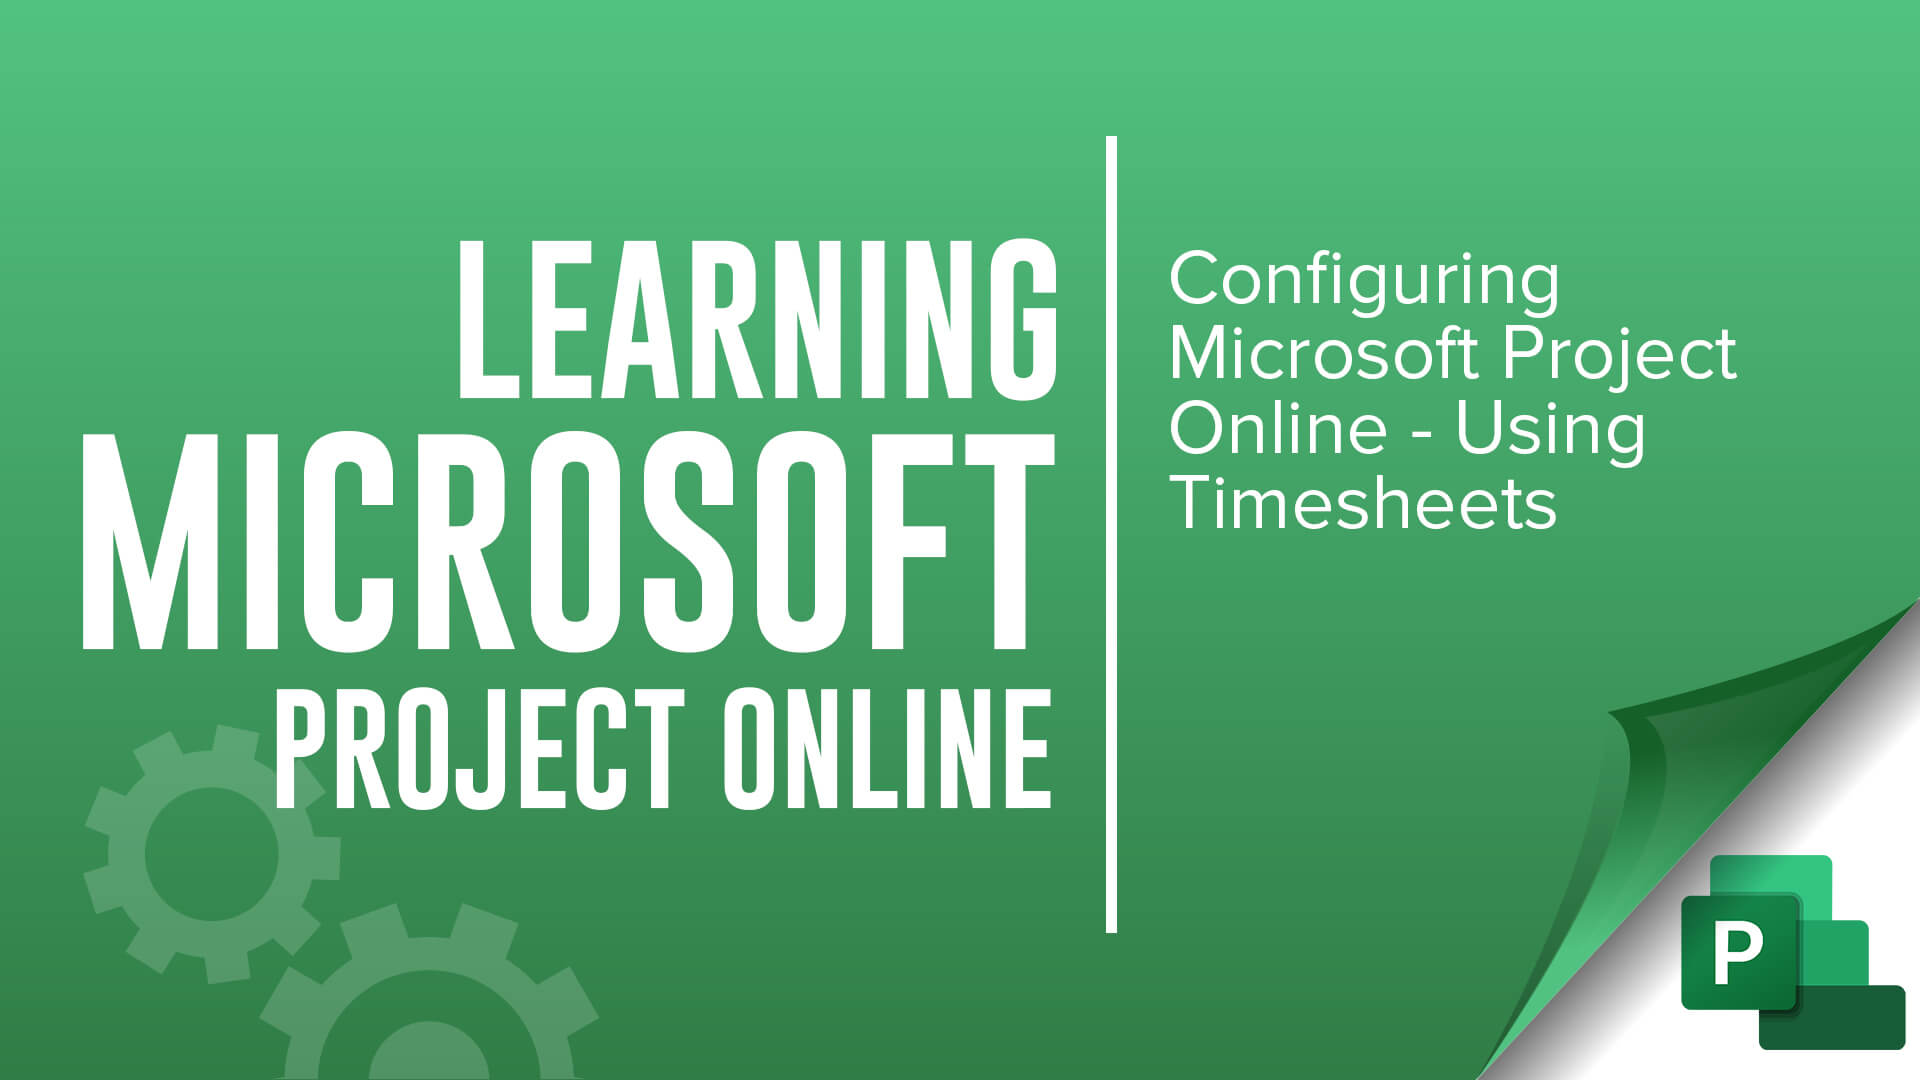 learning Microsoft Project Online - Configuring Timesheets